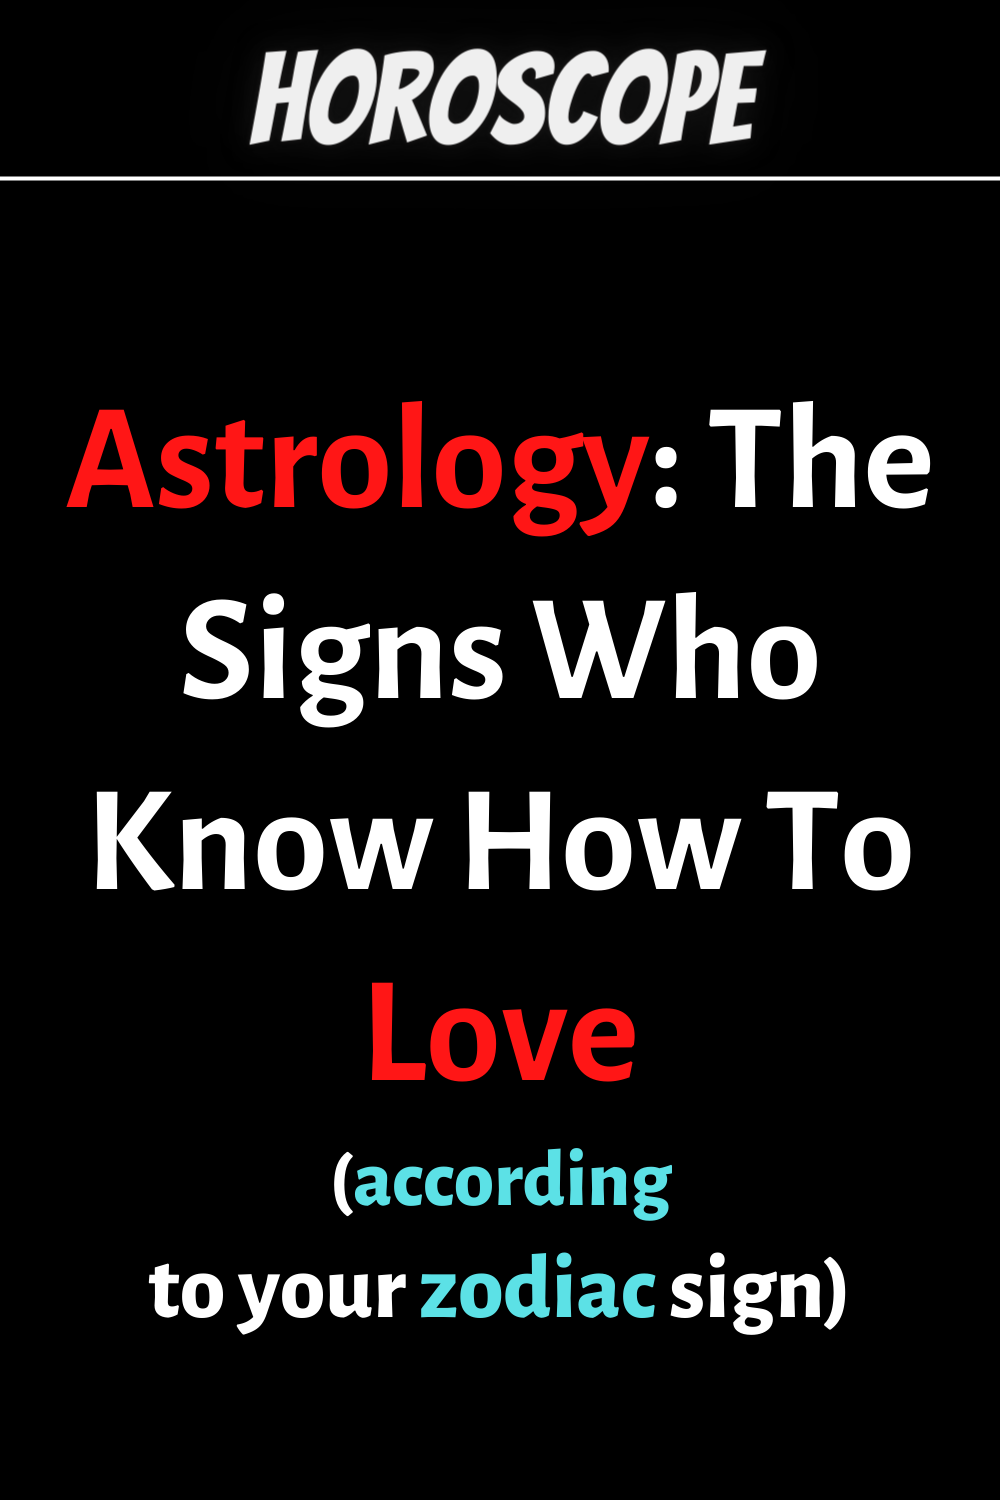 Astrology: The Zodiac Signs Who Know How To Love